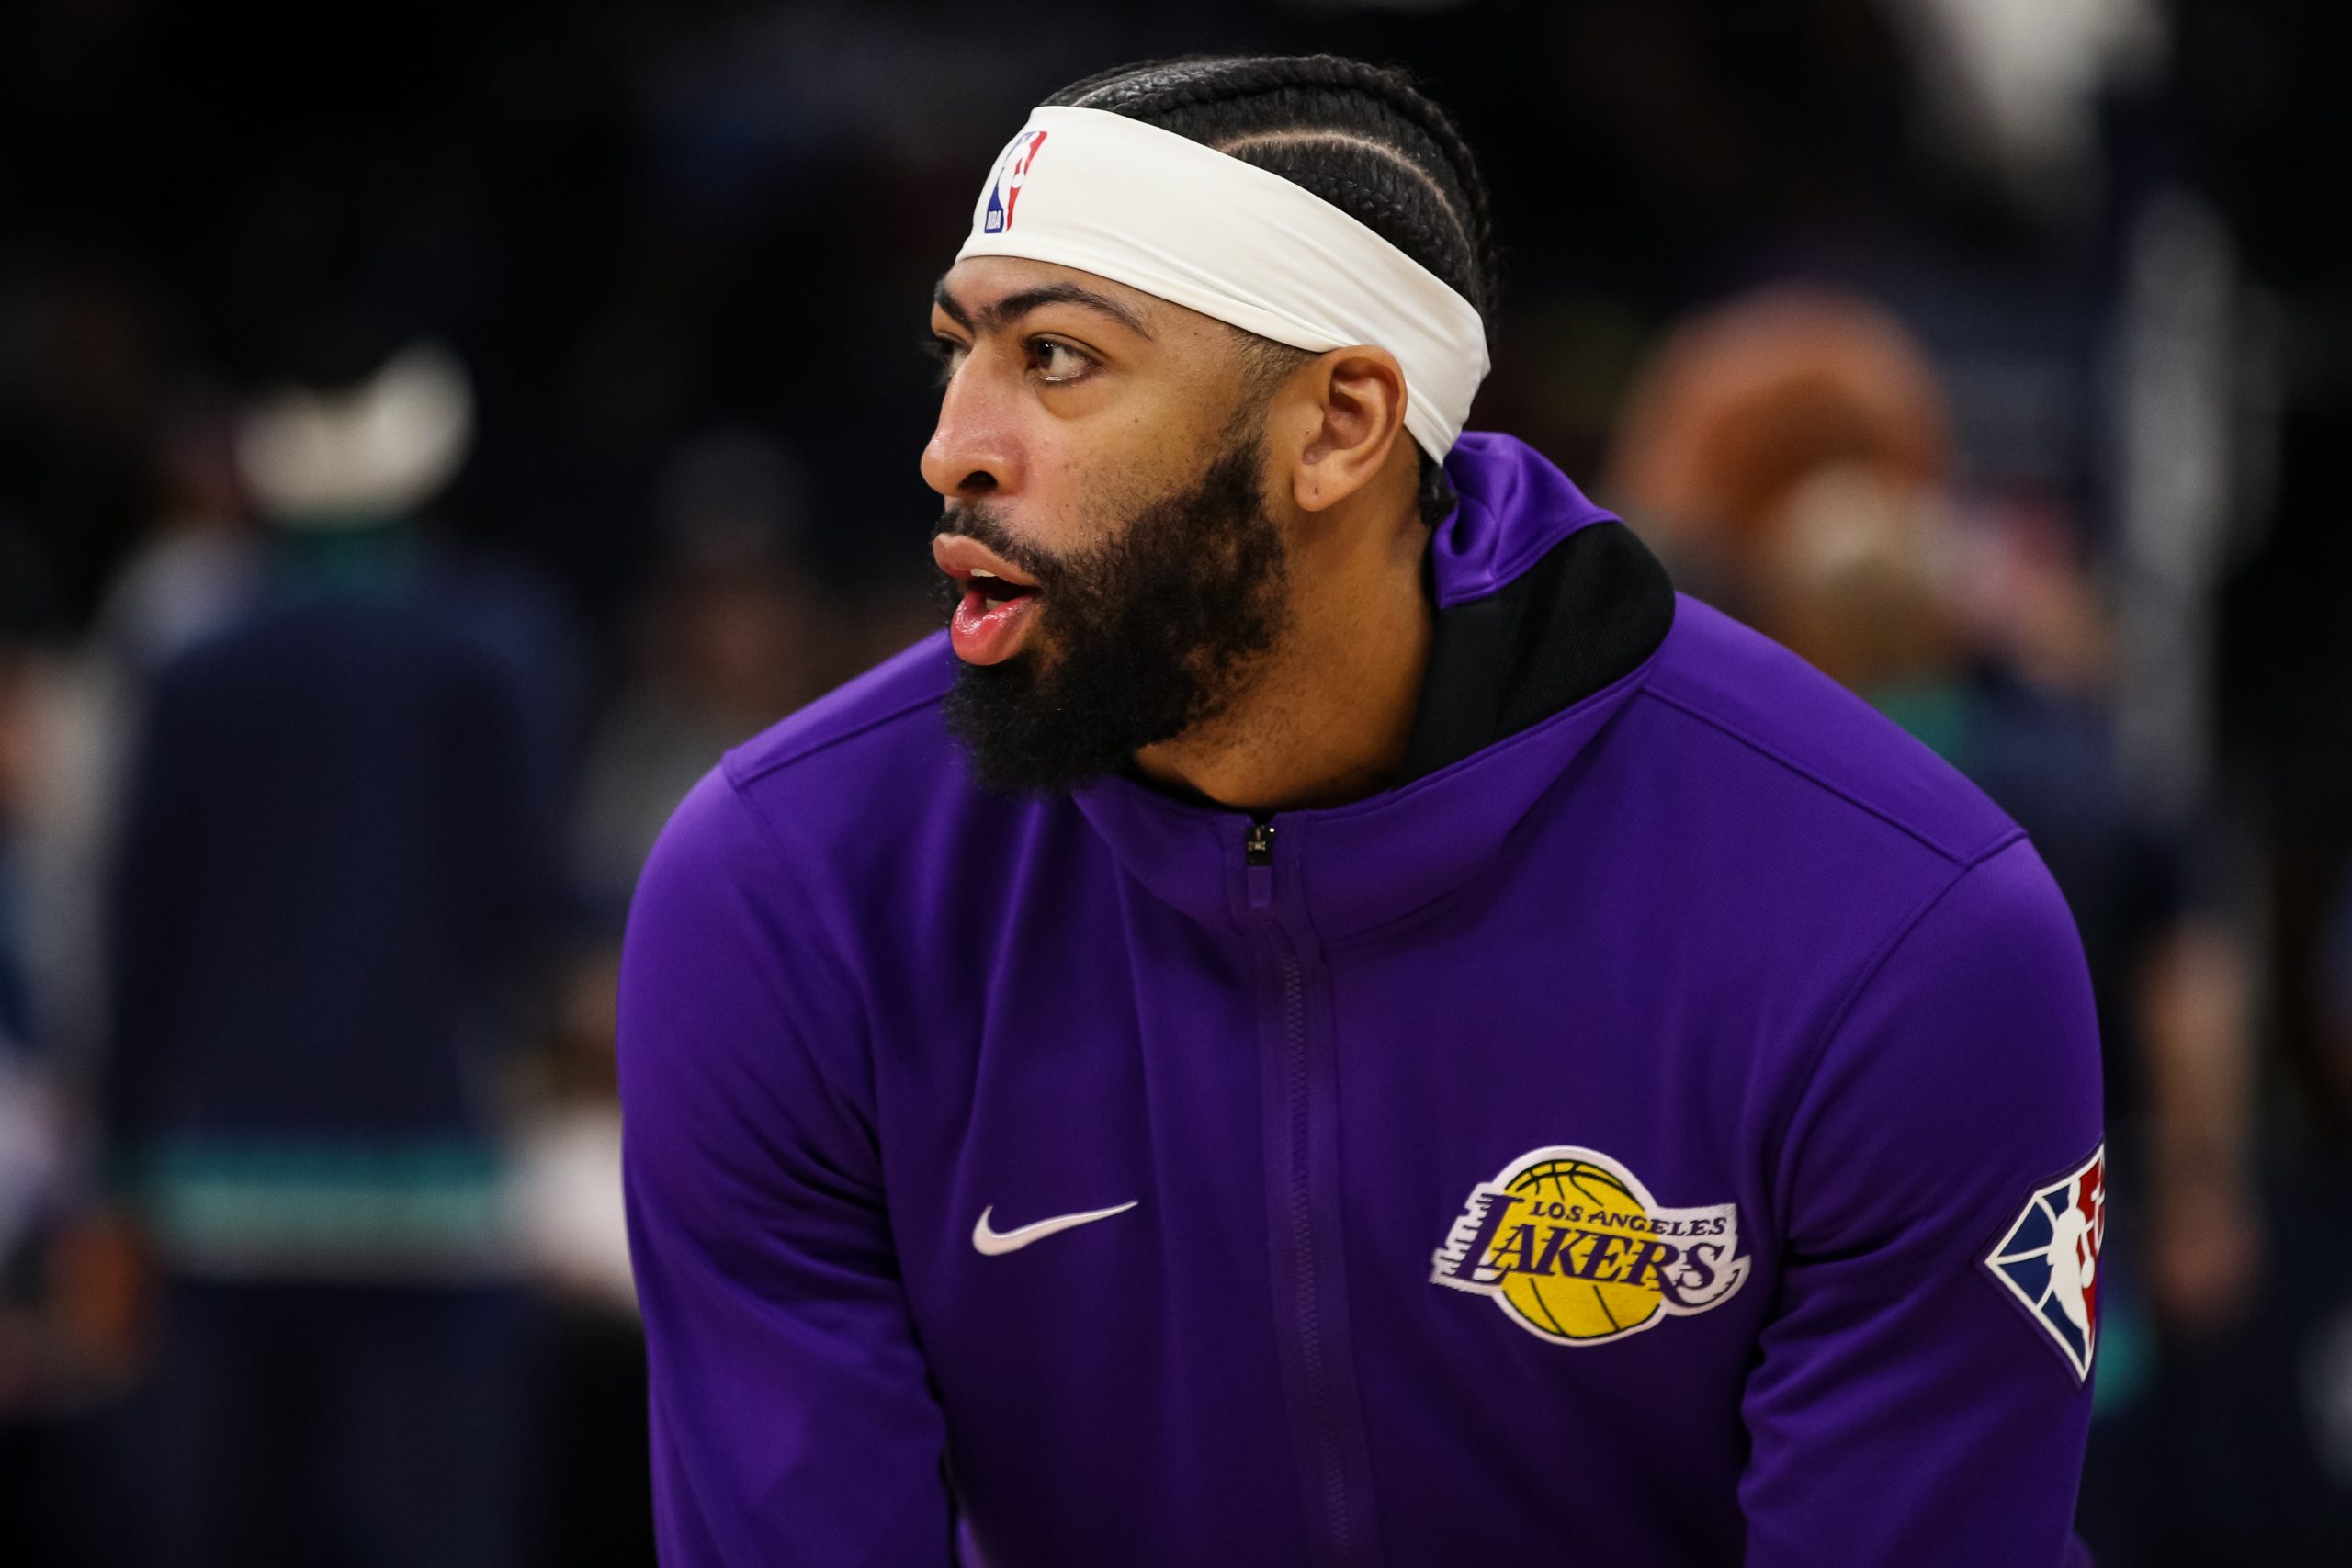 Los Angeles Lakers star power forward Anthony Davis warms up before a game against the Minnesota Timberwolves on Dec. 17.